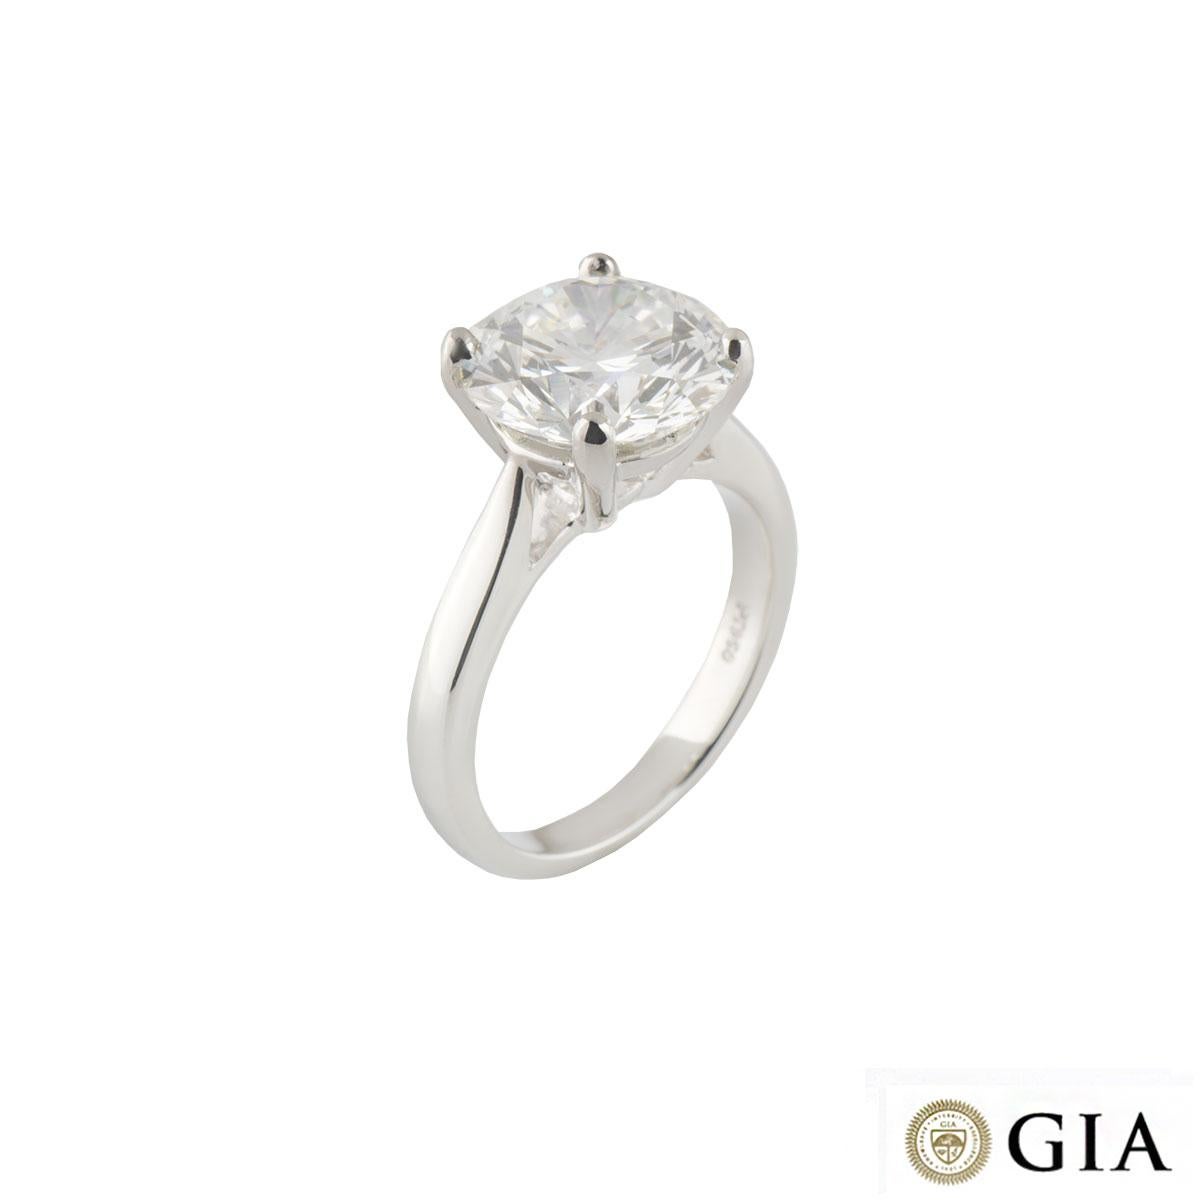 GIA Certified Round Brilliant Diamond Solitaire Engagement Ring 5.01 ct J/VVS2 For Sale 1